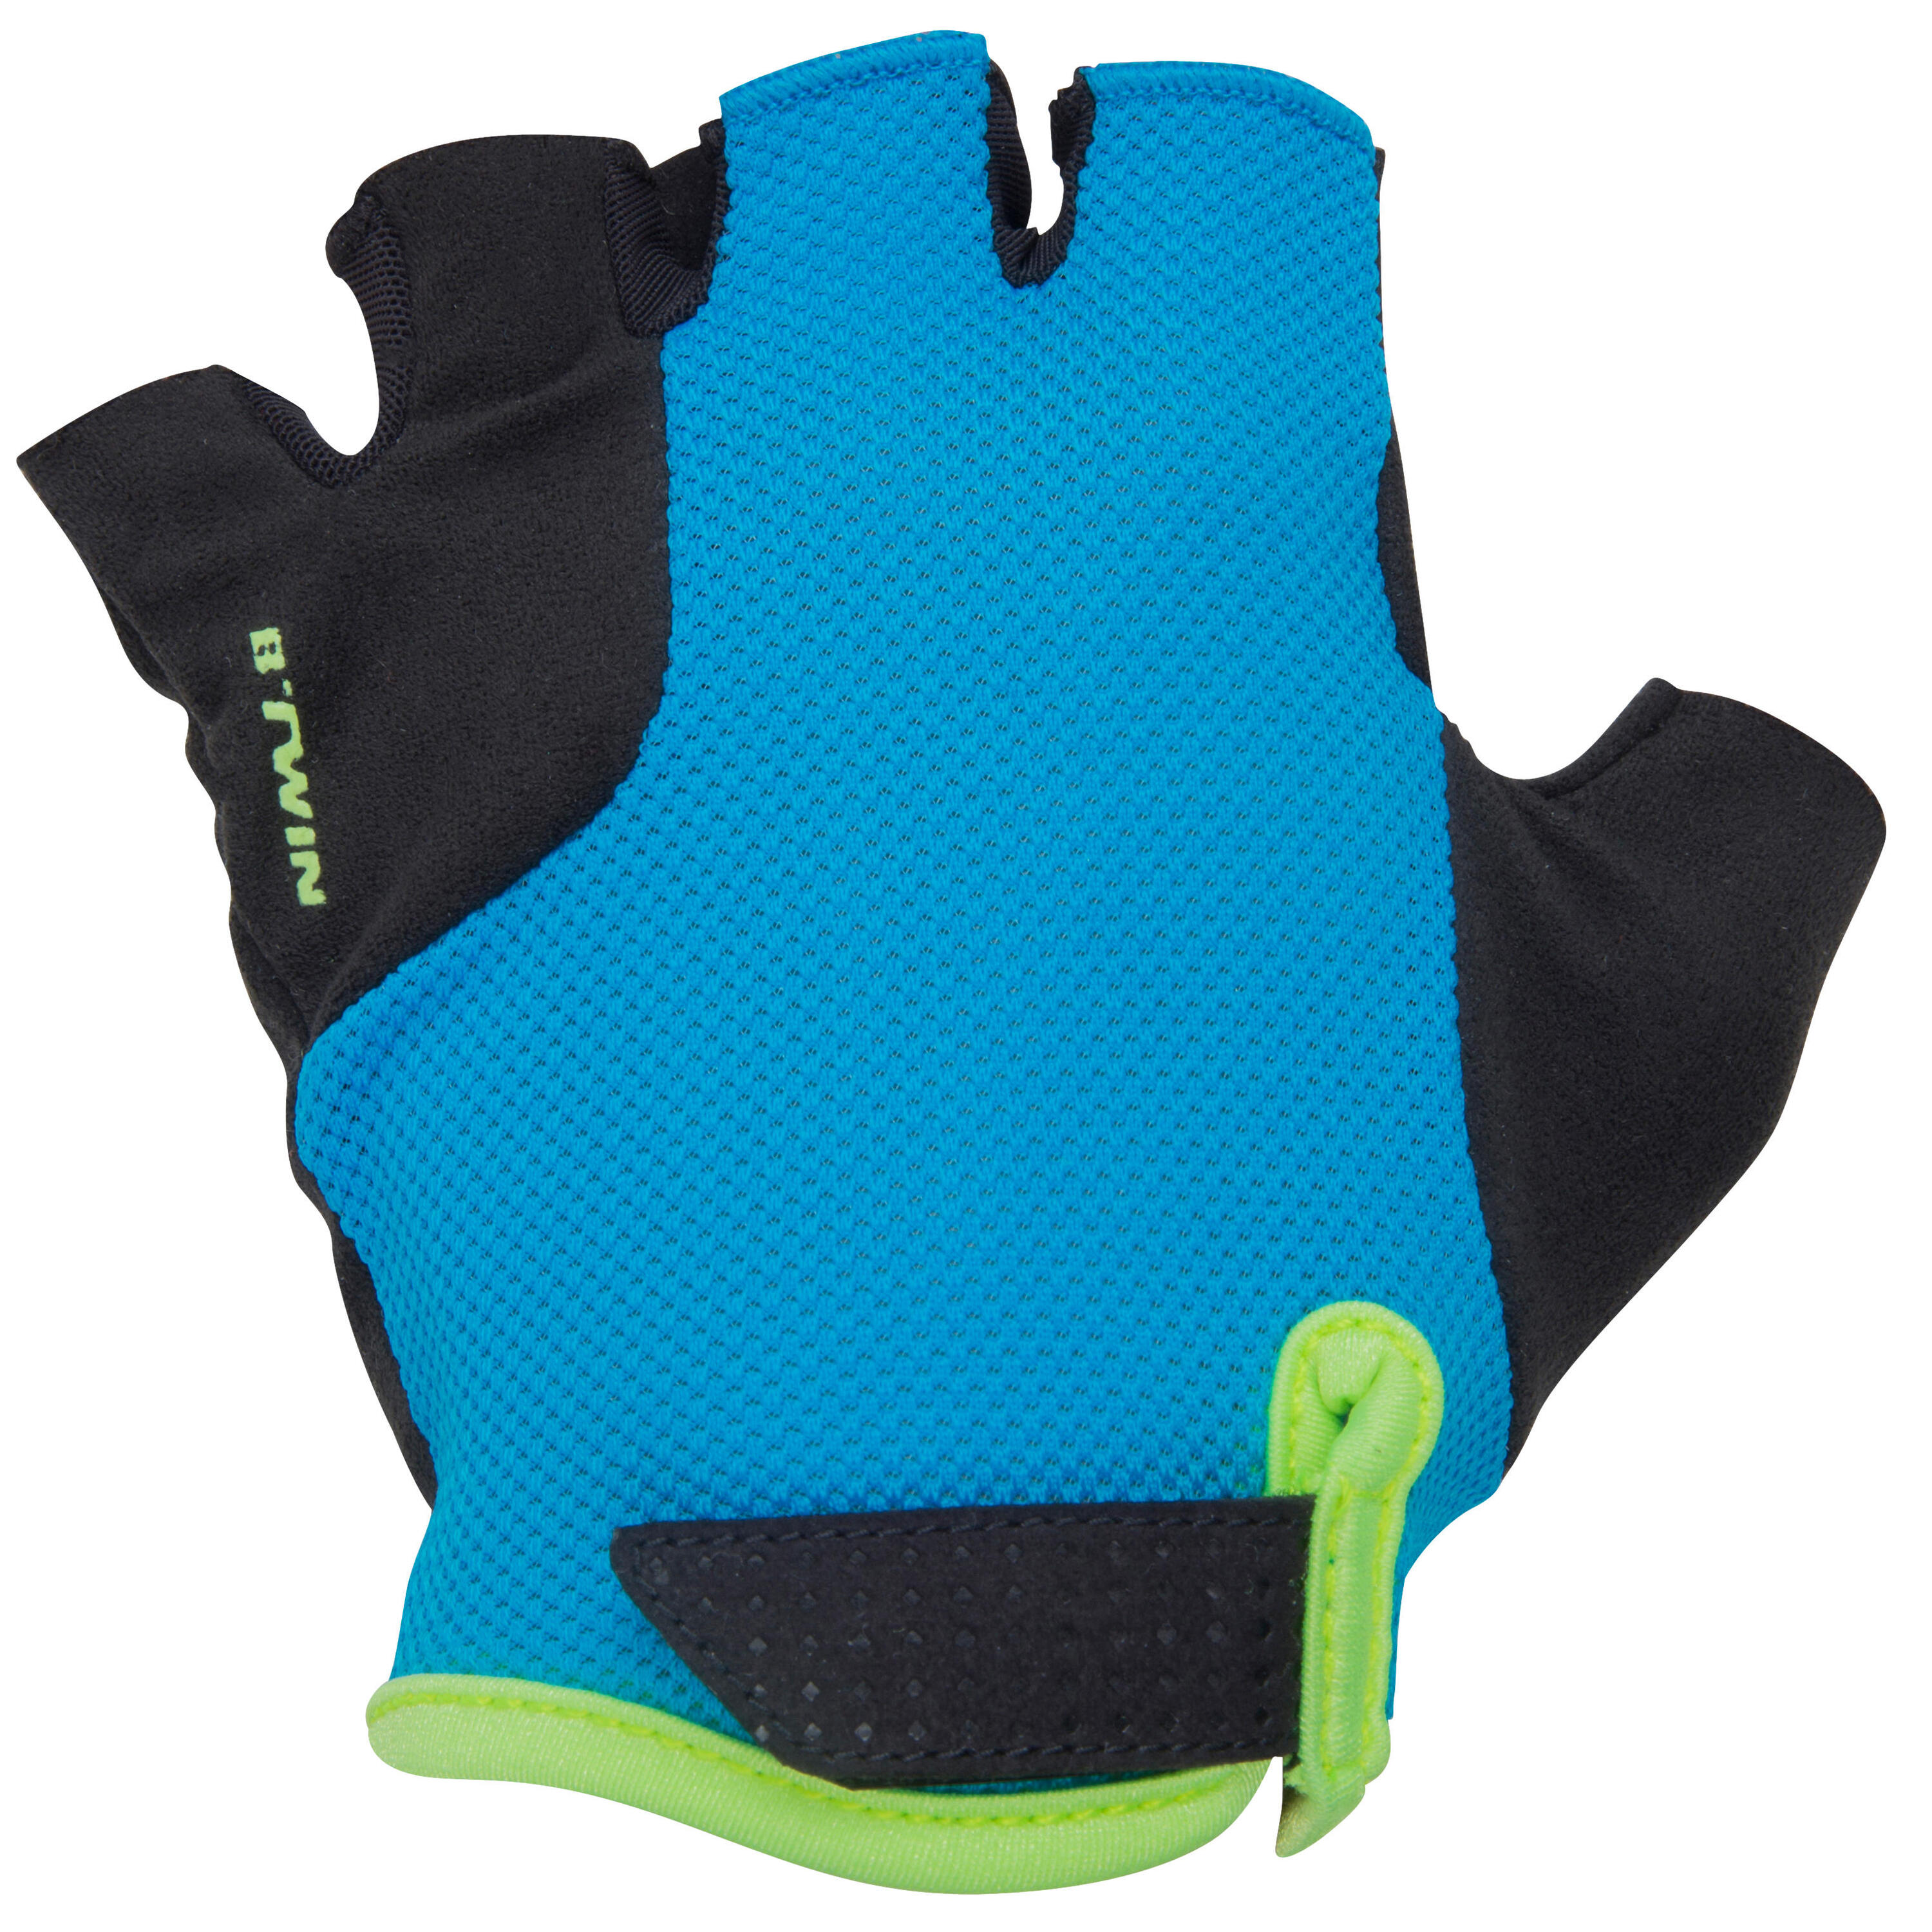 BTWIN 500 Kids' Cycling Gloves - Blue